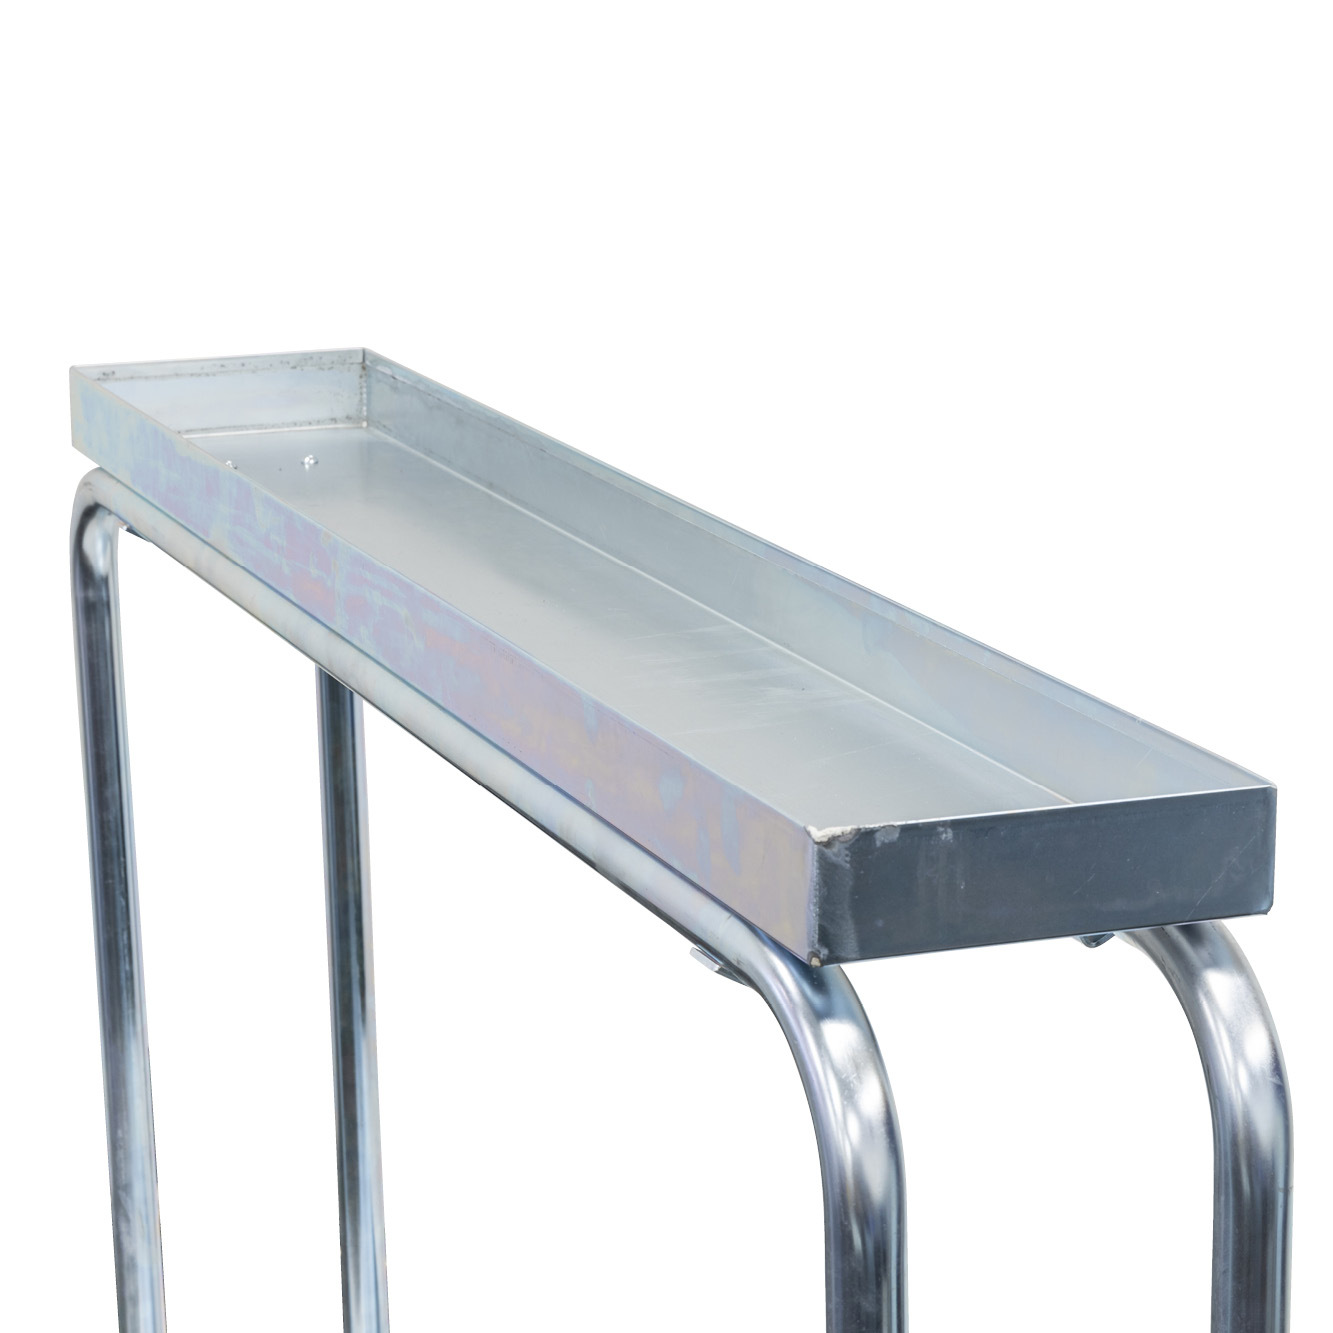 Add-on Tray with one Load Bar to suit